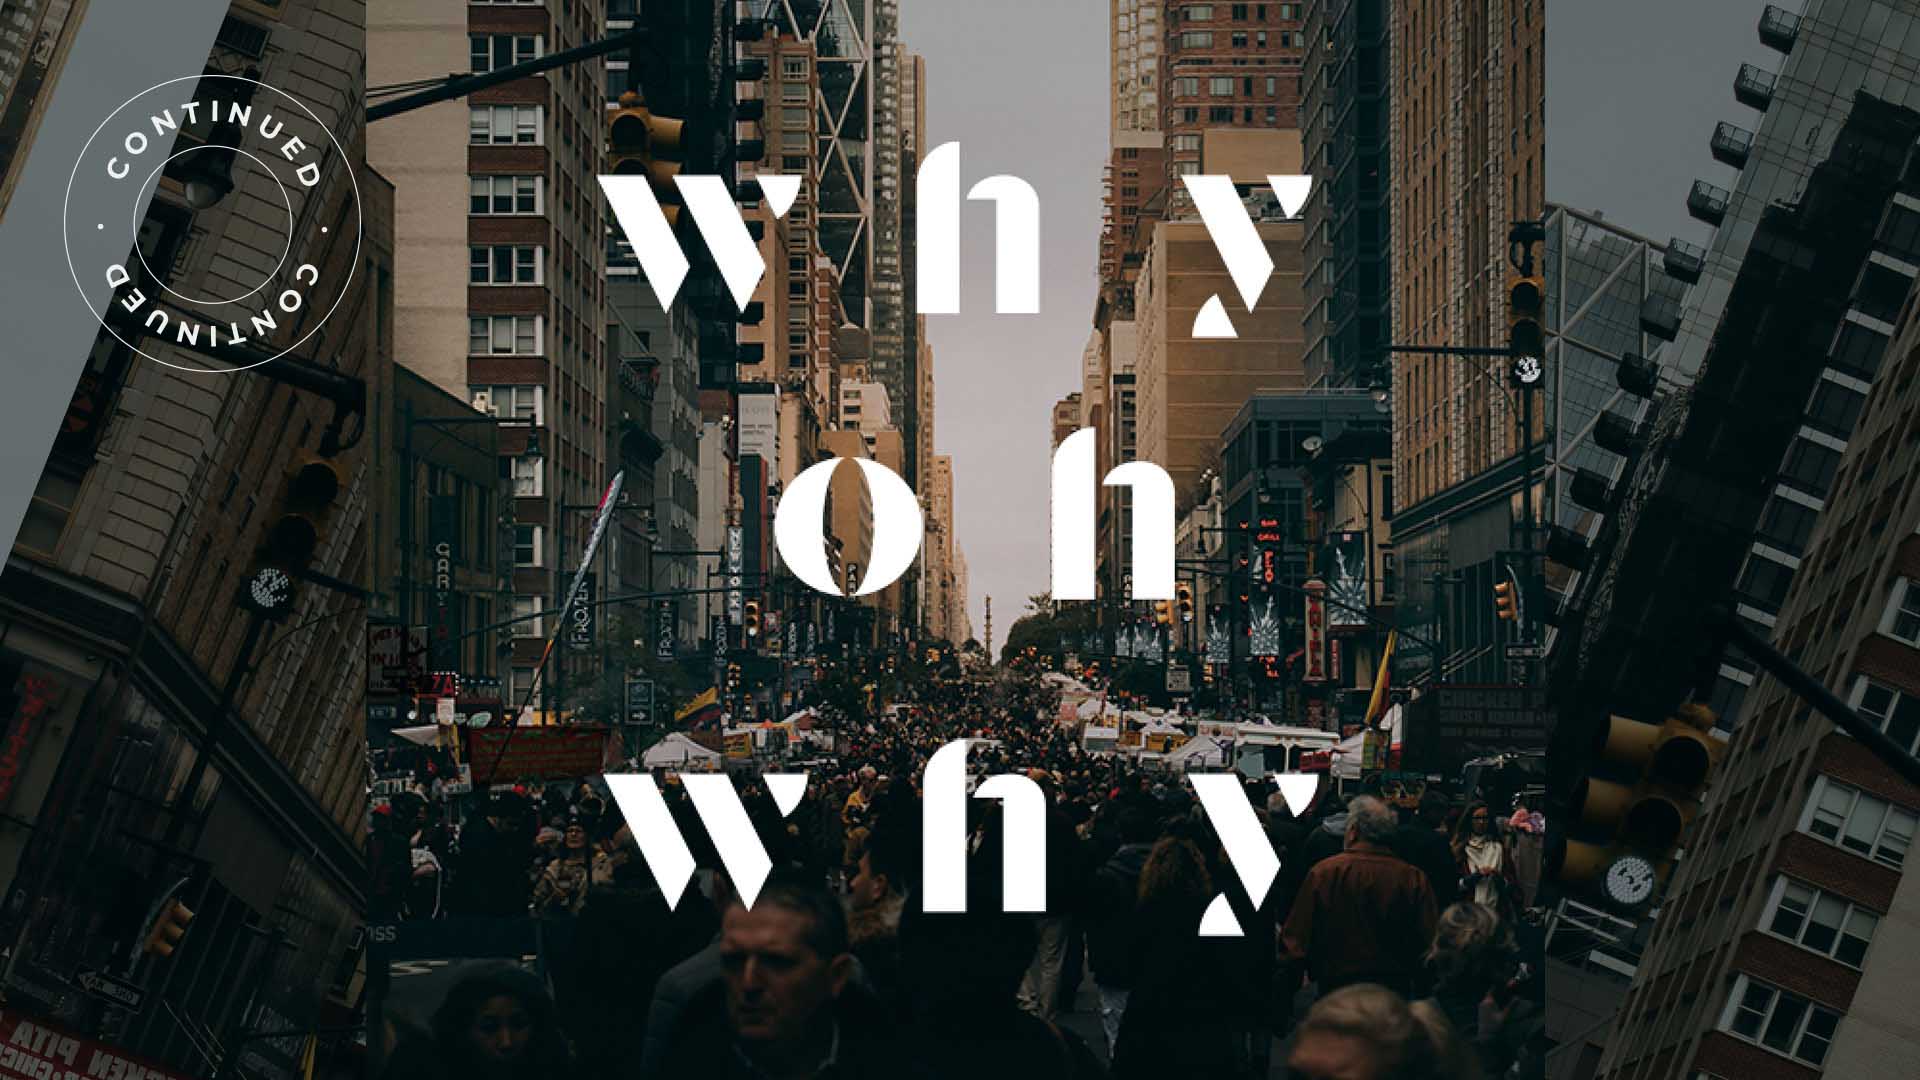 Why Oh Why – Continued